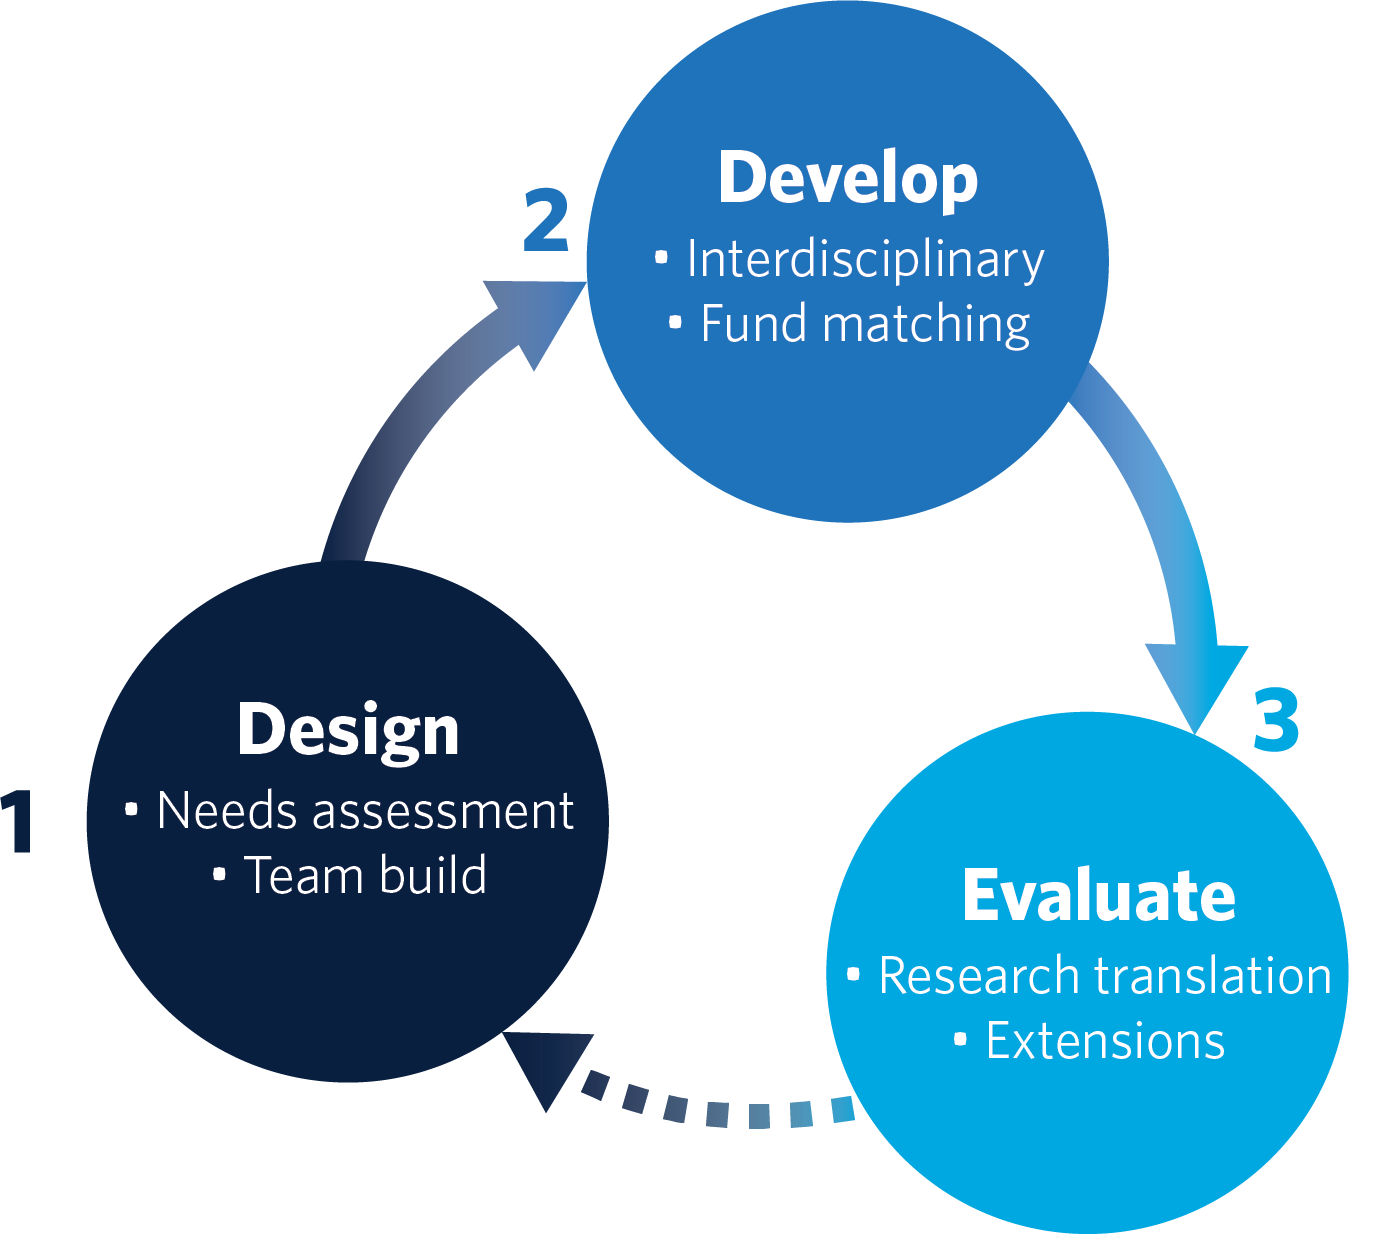 Three blue circles represent the phases of the partnership model: 1. Design, 2. Develop, 3. Evaluate